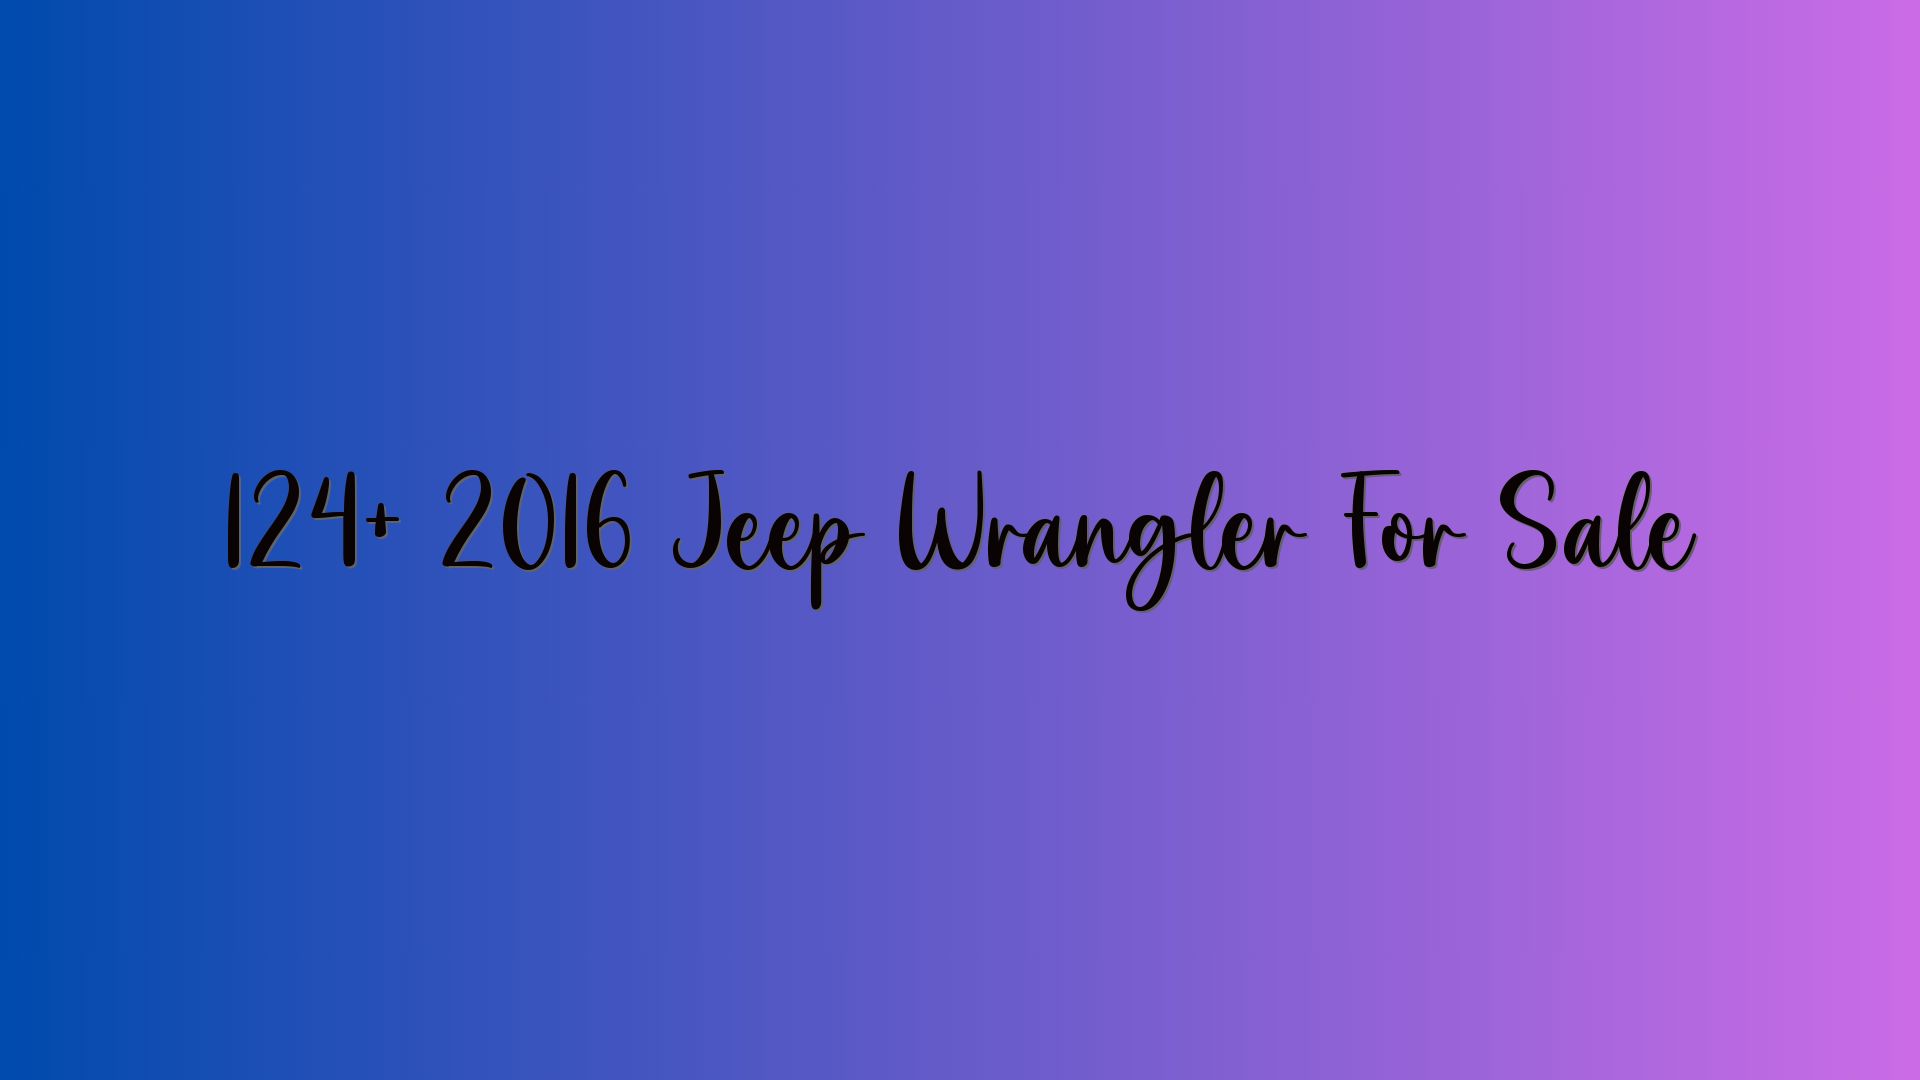 124+ 2016 Jeep Wrangler For Sale